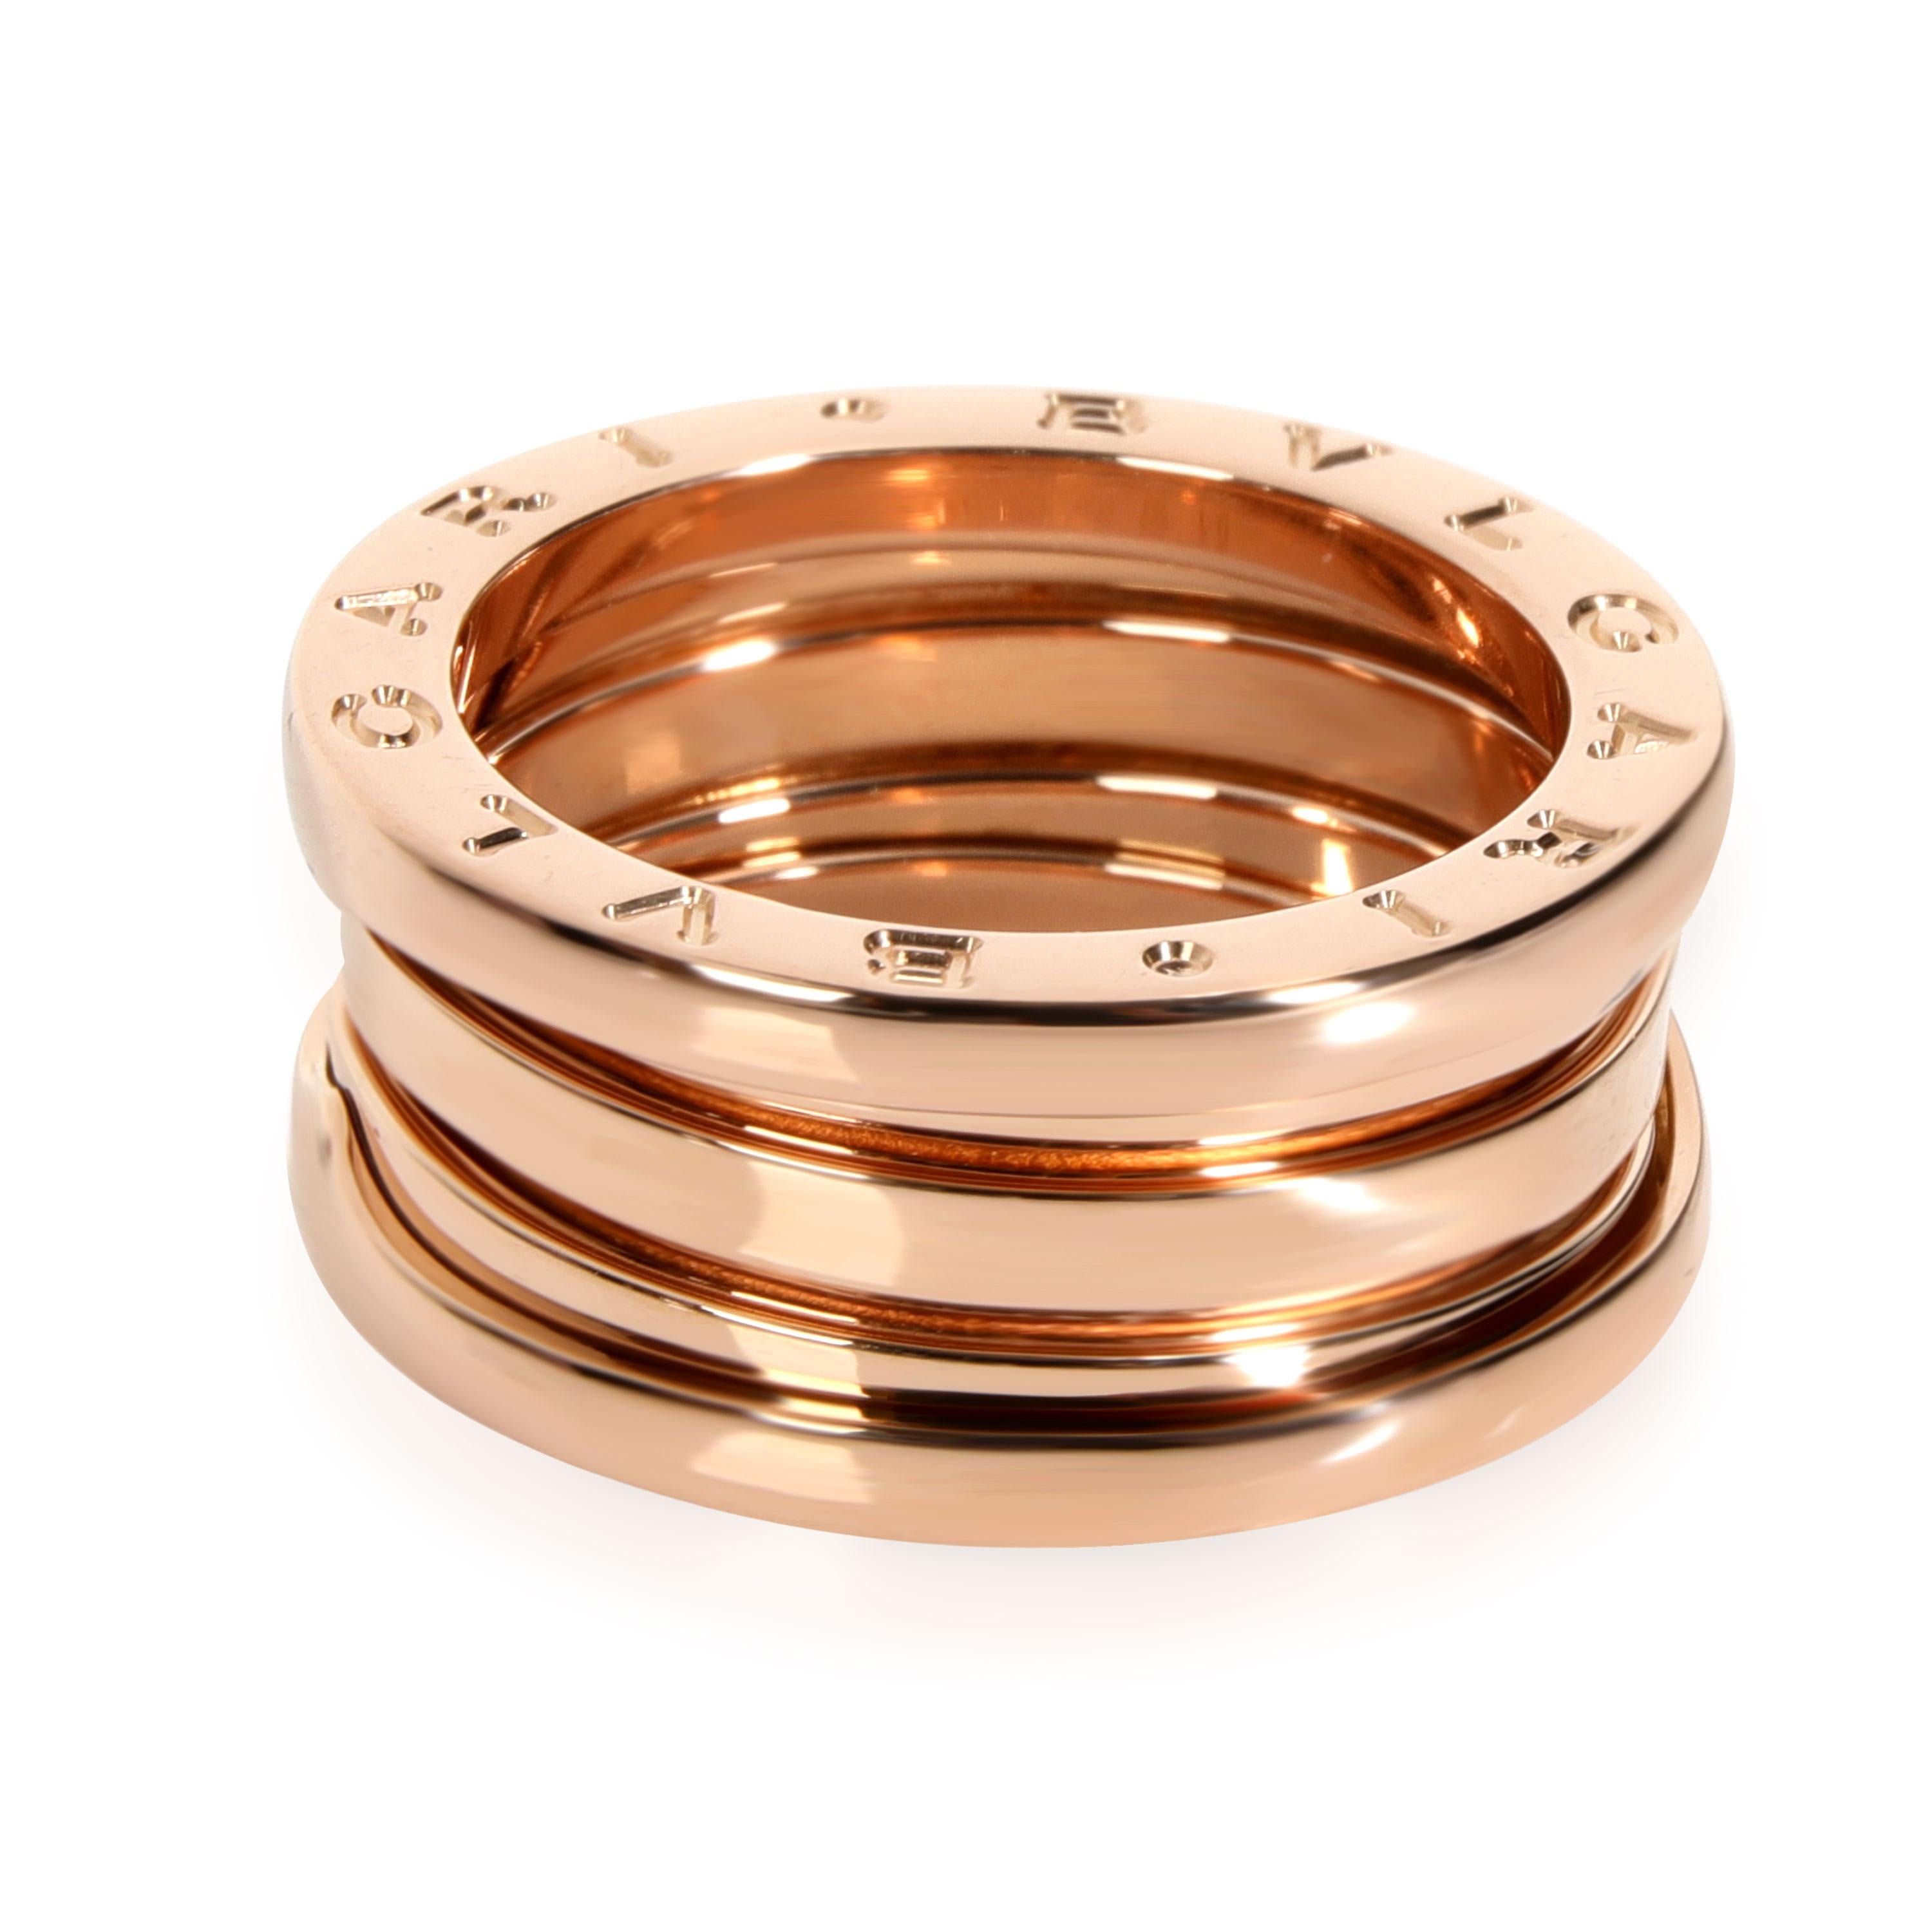 Bulgari B.zero1 Band in 18K Rose Gold

PRIMARY DETAILS
SKU: 111034
Listing Title: Bulgari B.zero1 Band in 18K Rose Gold
Condition Description: Retails for 2,160 USD. In excellent condition and recently polished. Ring size is 51. Comes with